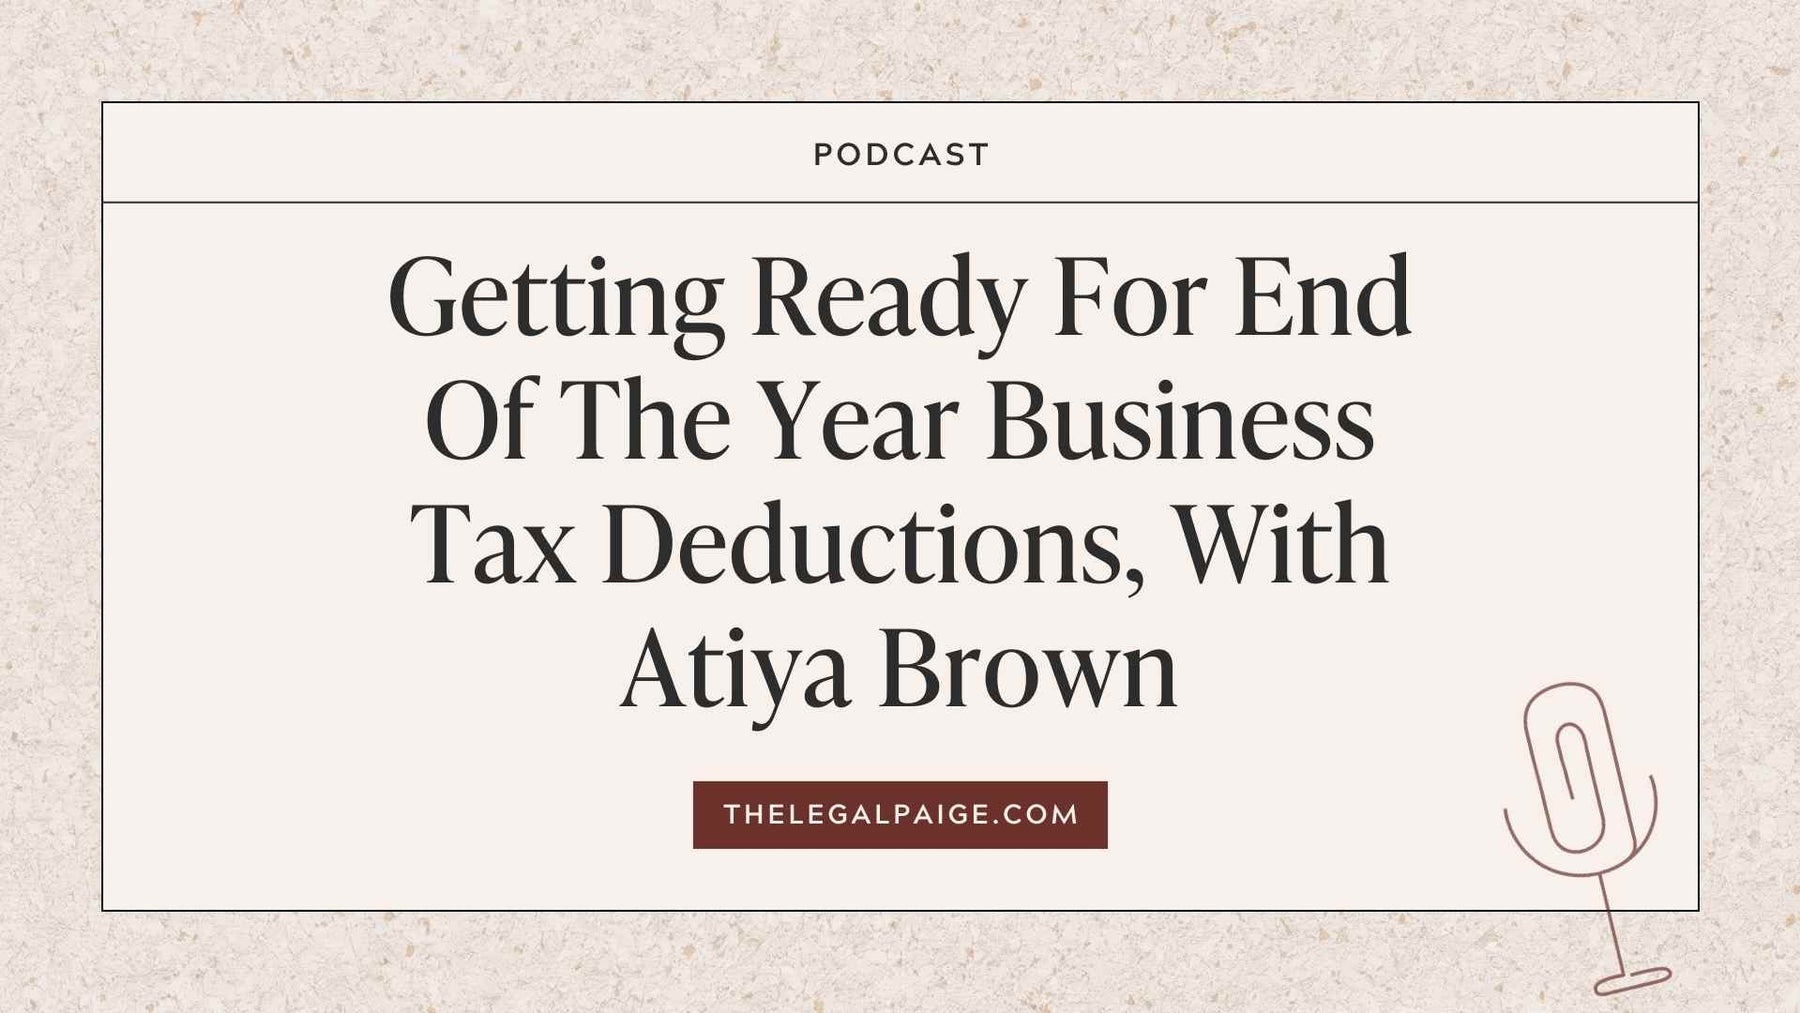 Episode 115: Getting Ready For End Of The Year Business Tax Deductions, With Atiya Brown